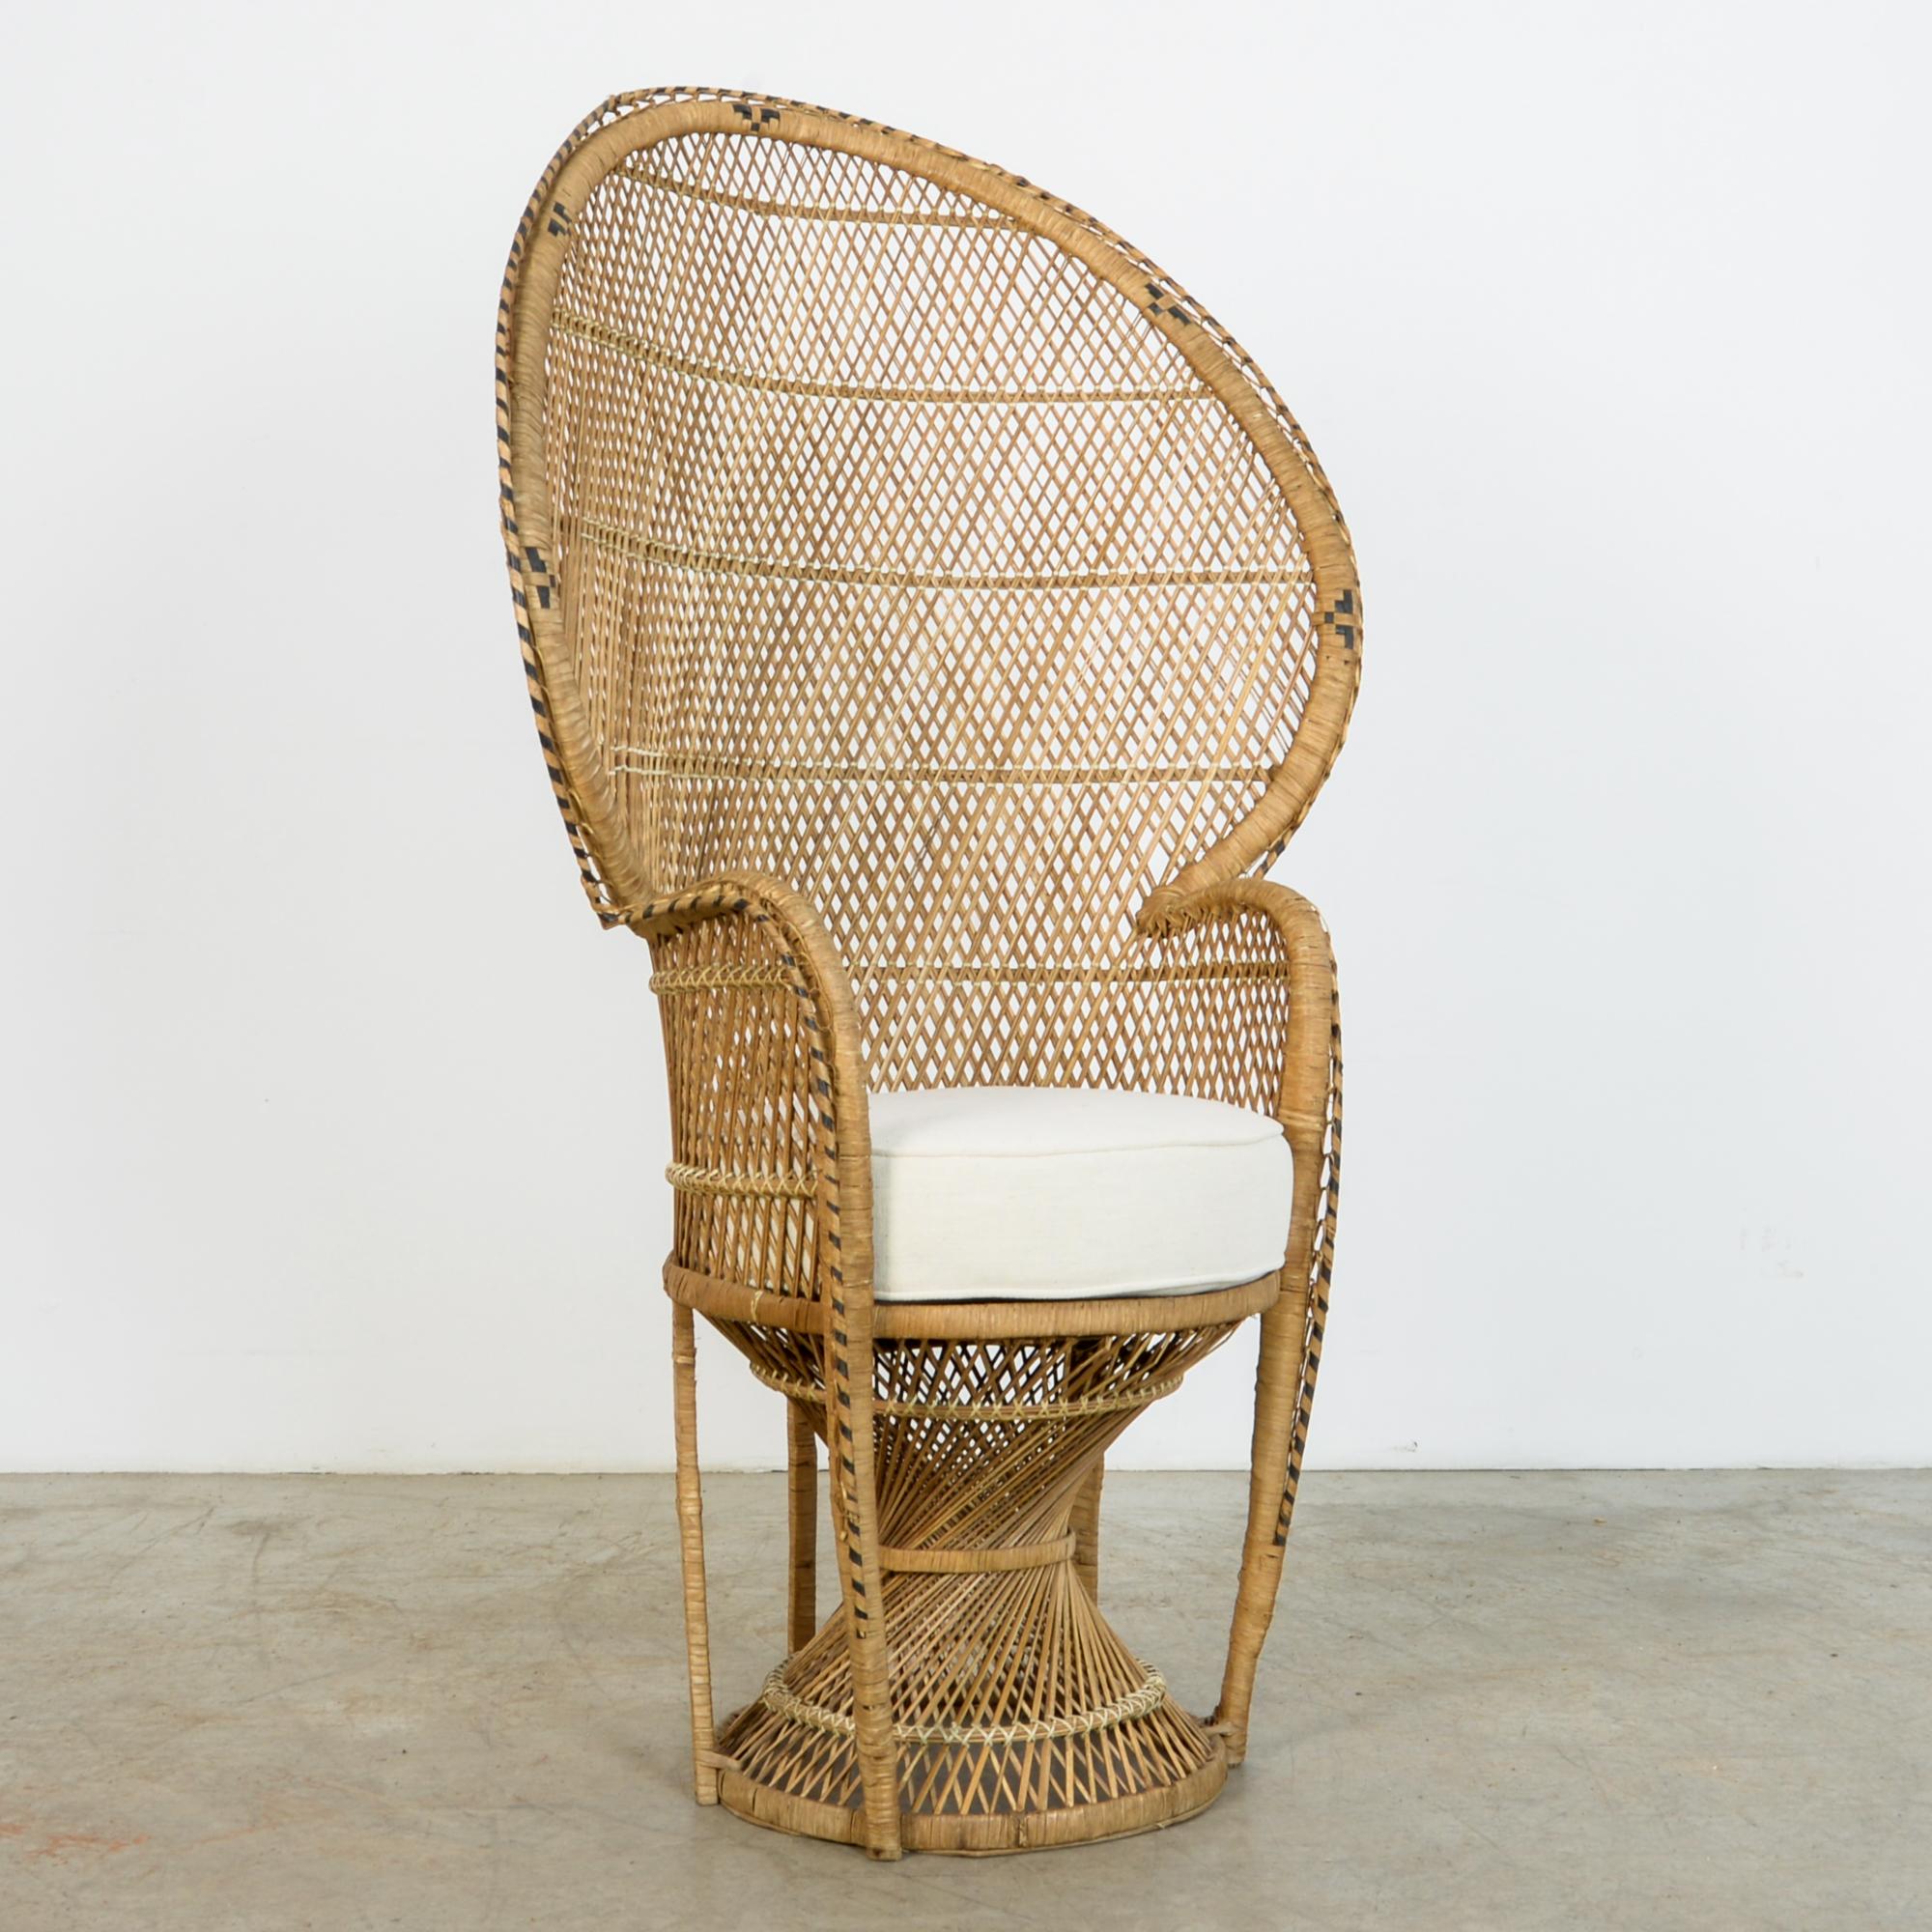 In typical mid-20th century rattan fashion, an “Emmanuelle” style armchair from circa 1960. This throne like chair has a great shape, with black striped ornament and oval back. Topped with a re-upholstered cotton-linen cushion, a casual and fresh